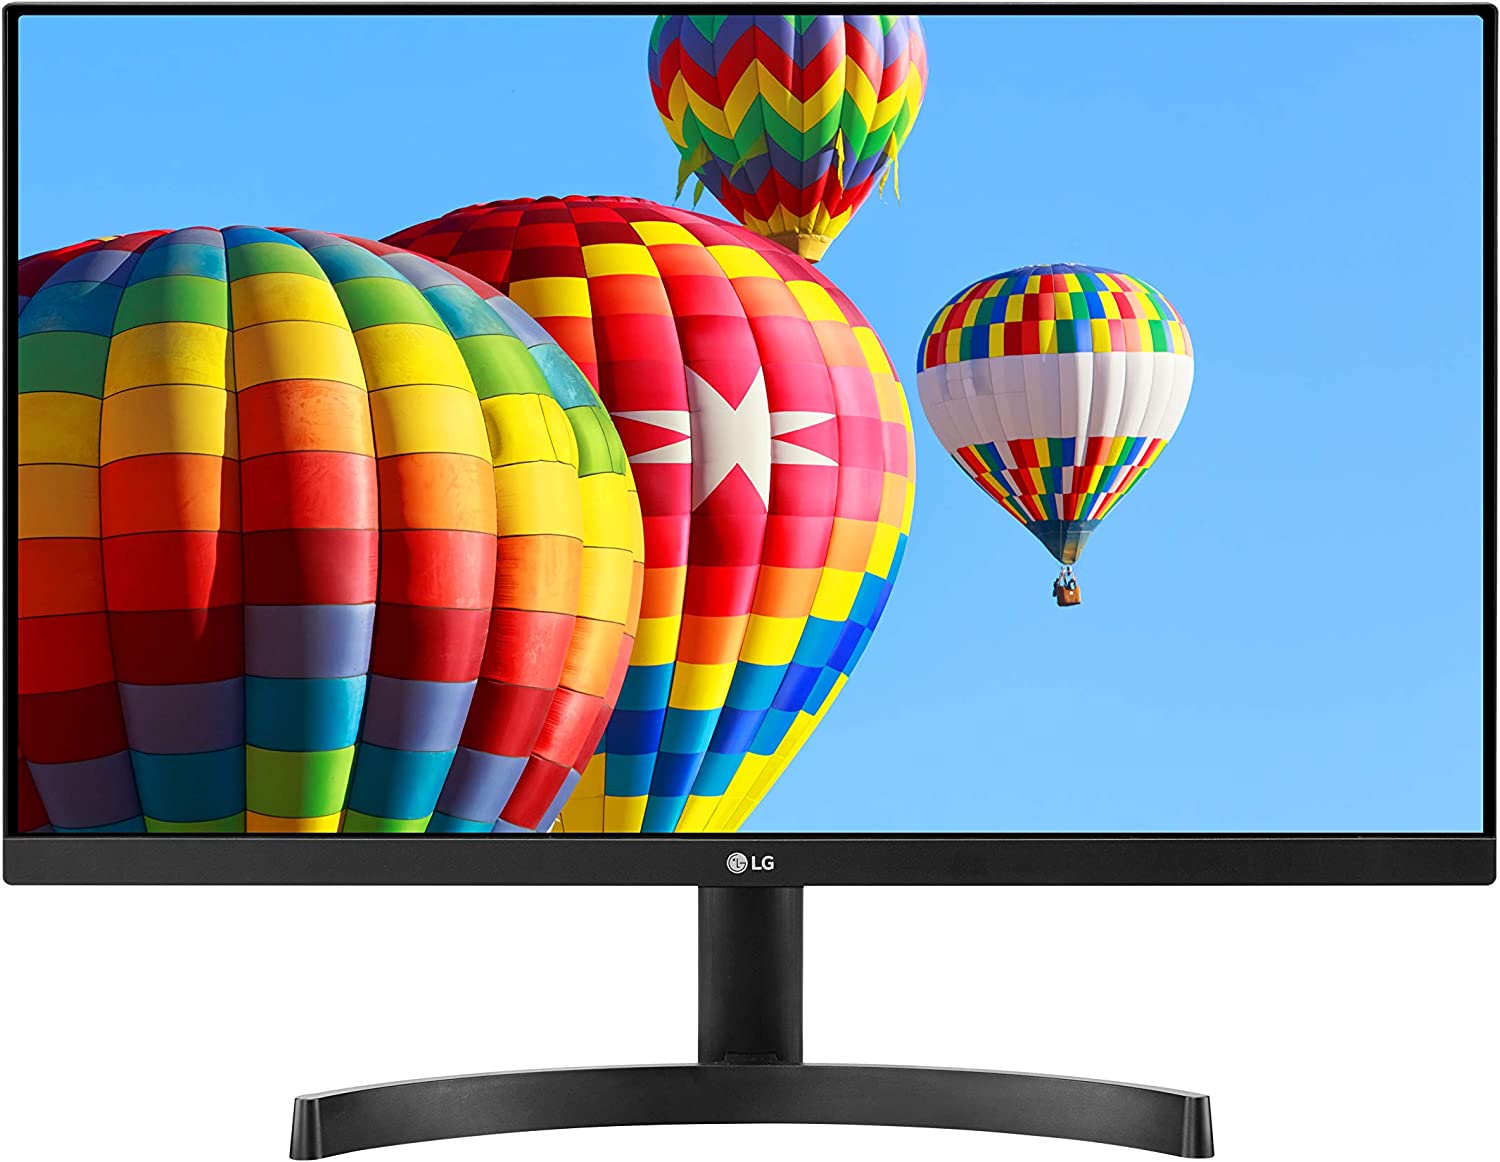 32 inch pc monitor review